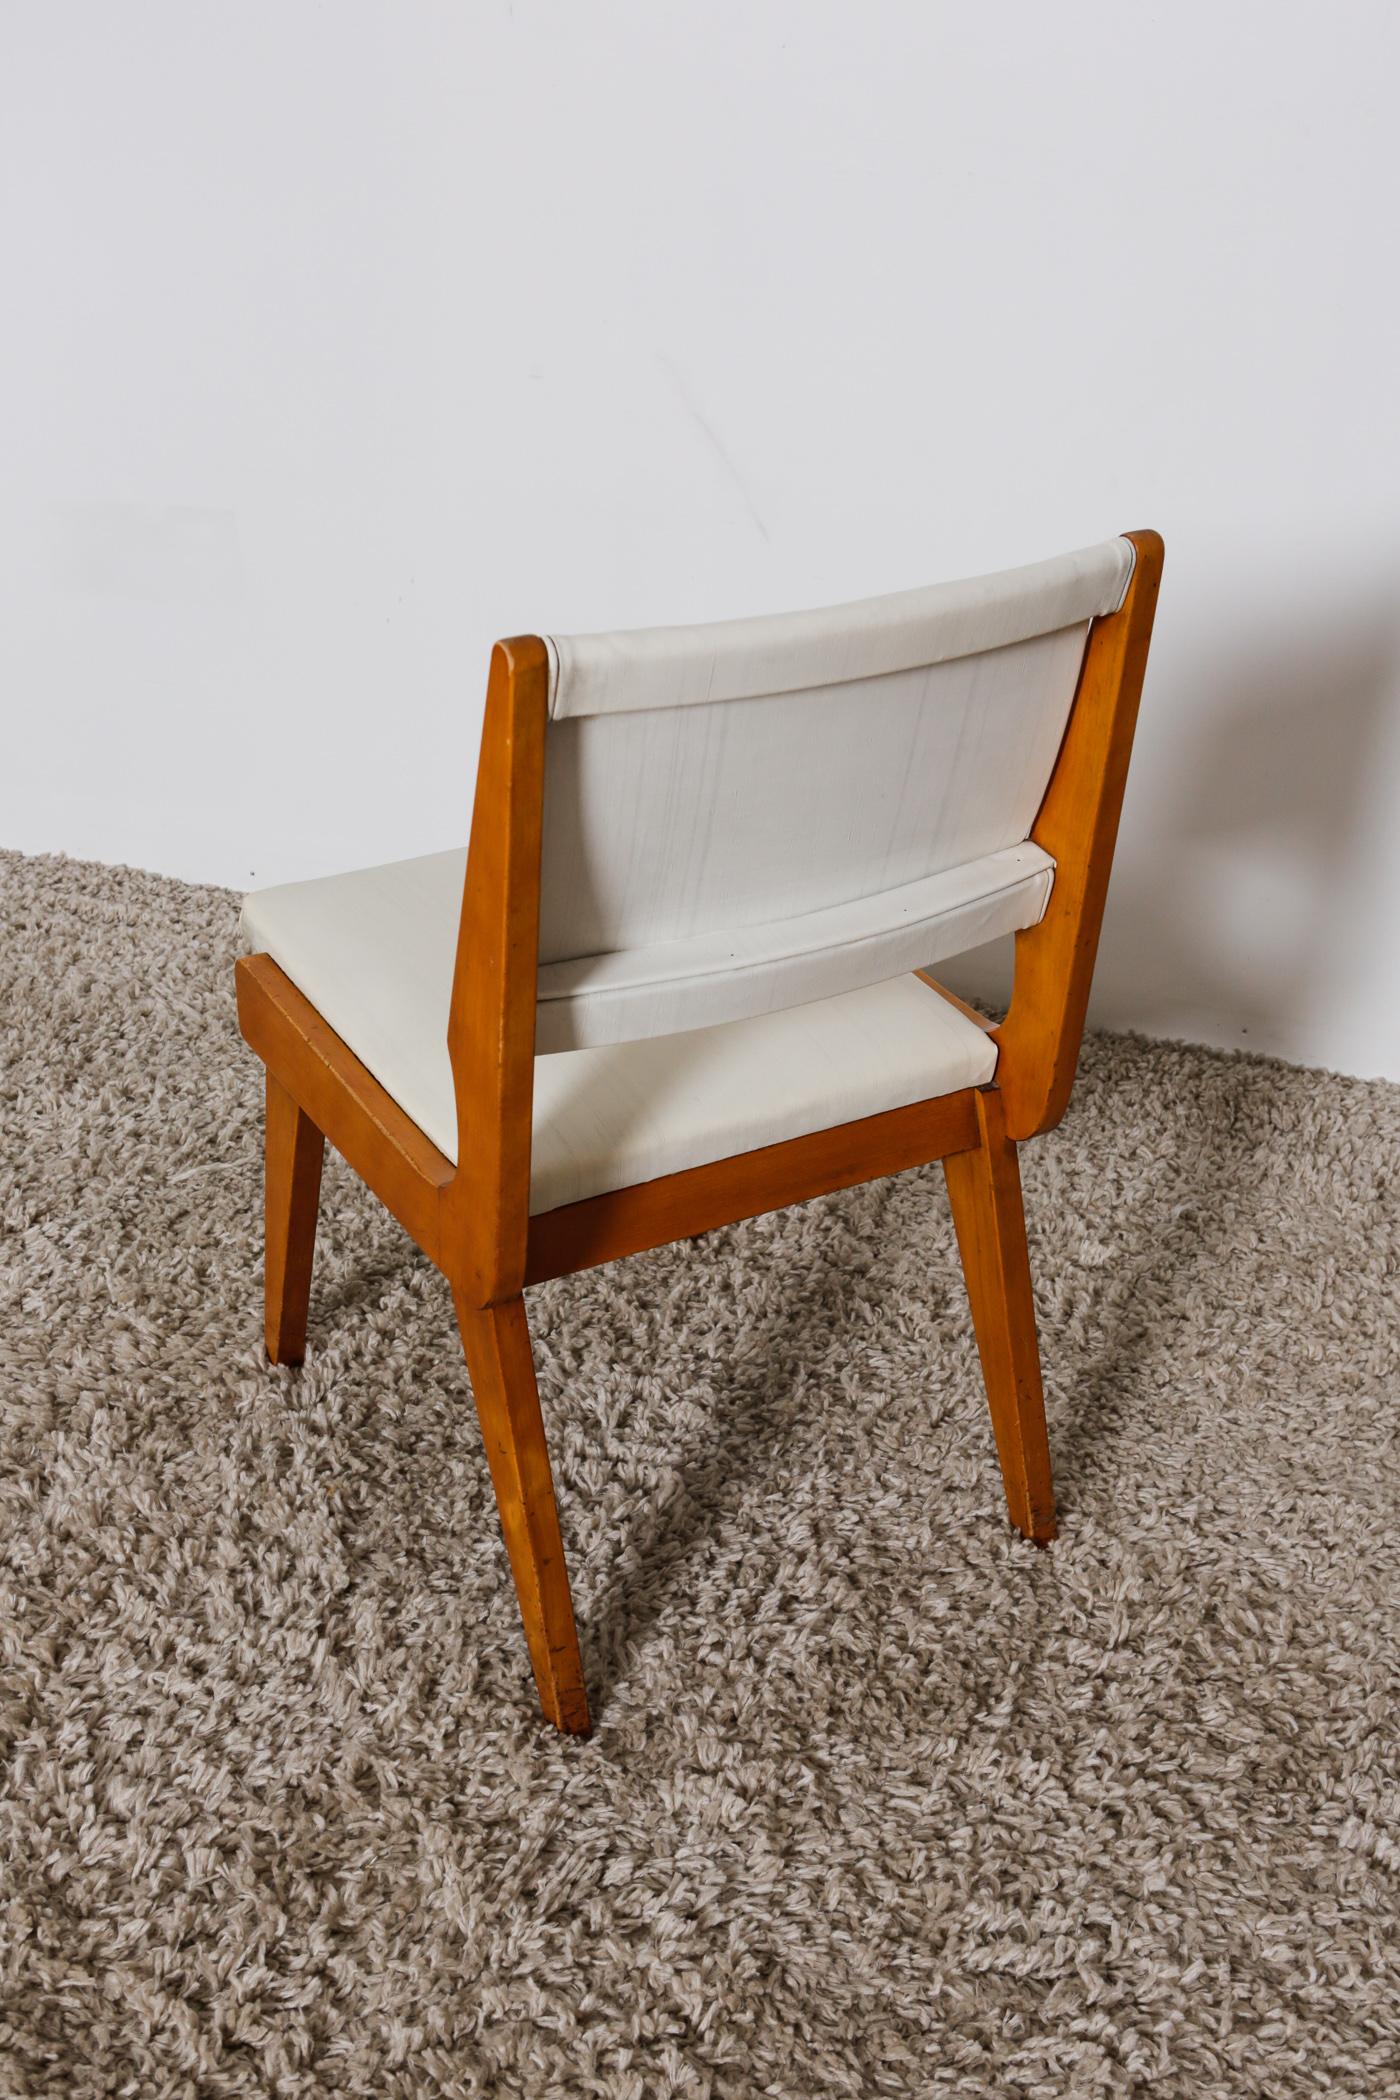 1960s Mid-Century Modern Maple Wood Dining Chairs #5976 by Feldman Brothers For Sale 3